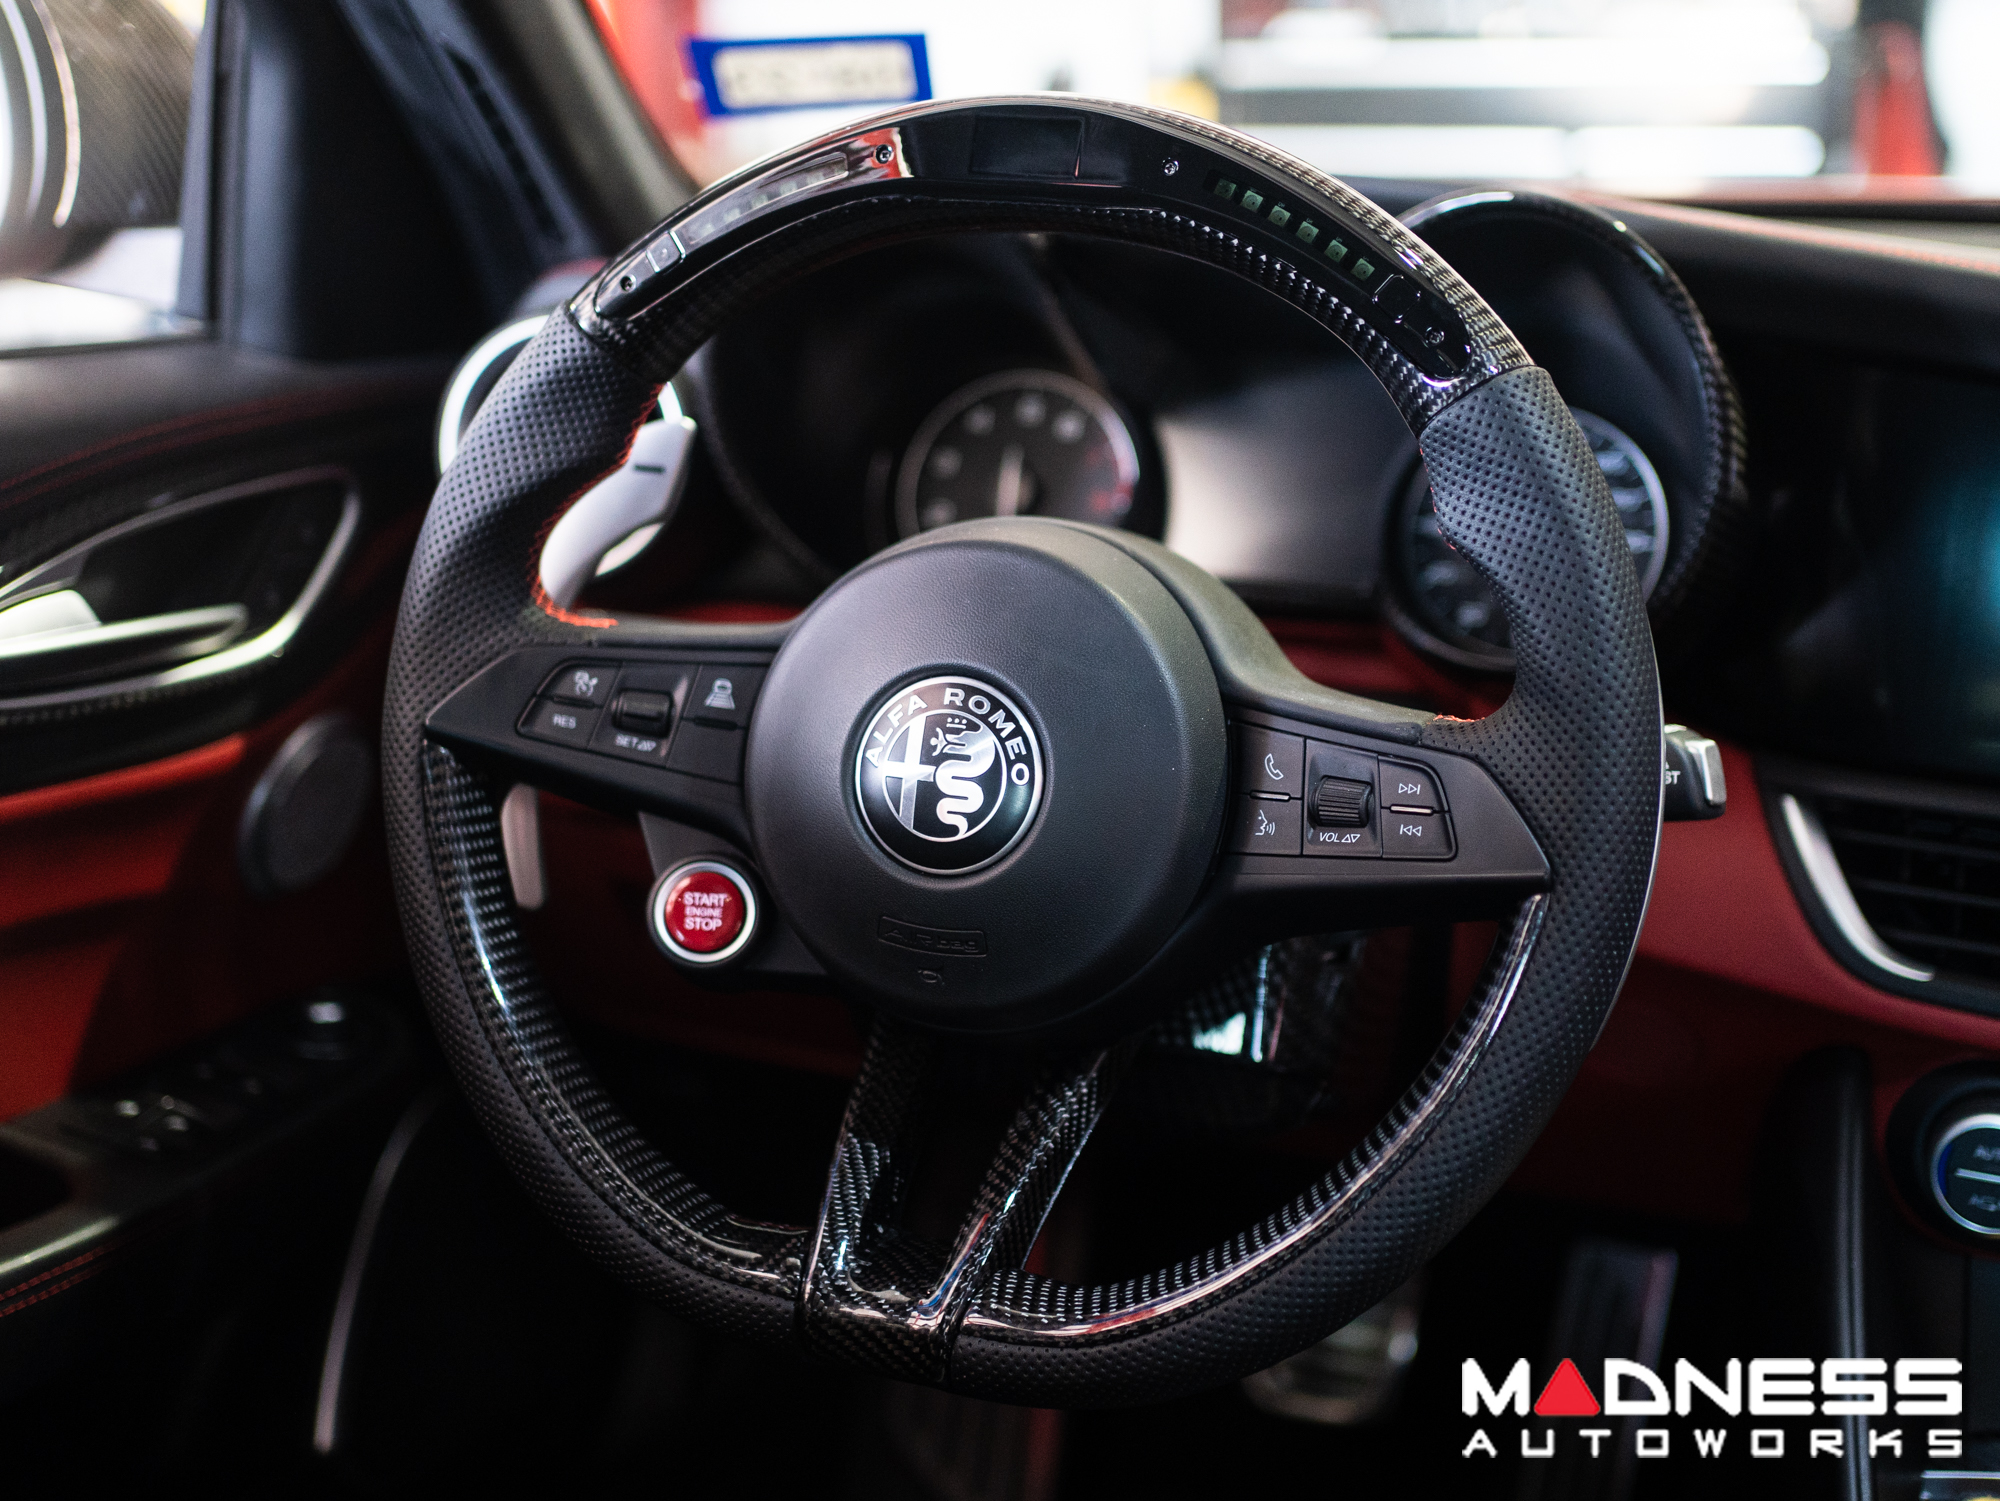 Alfa Romeo Giulia Steering Wheel - Carbon Fiber - w/ LED Functions - Perforated Leather - Non QV Models